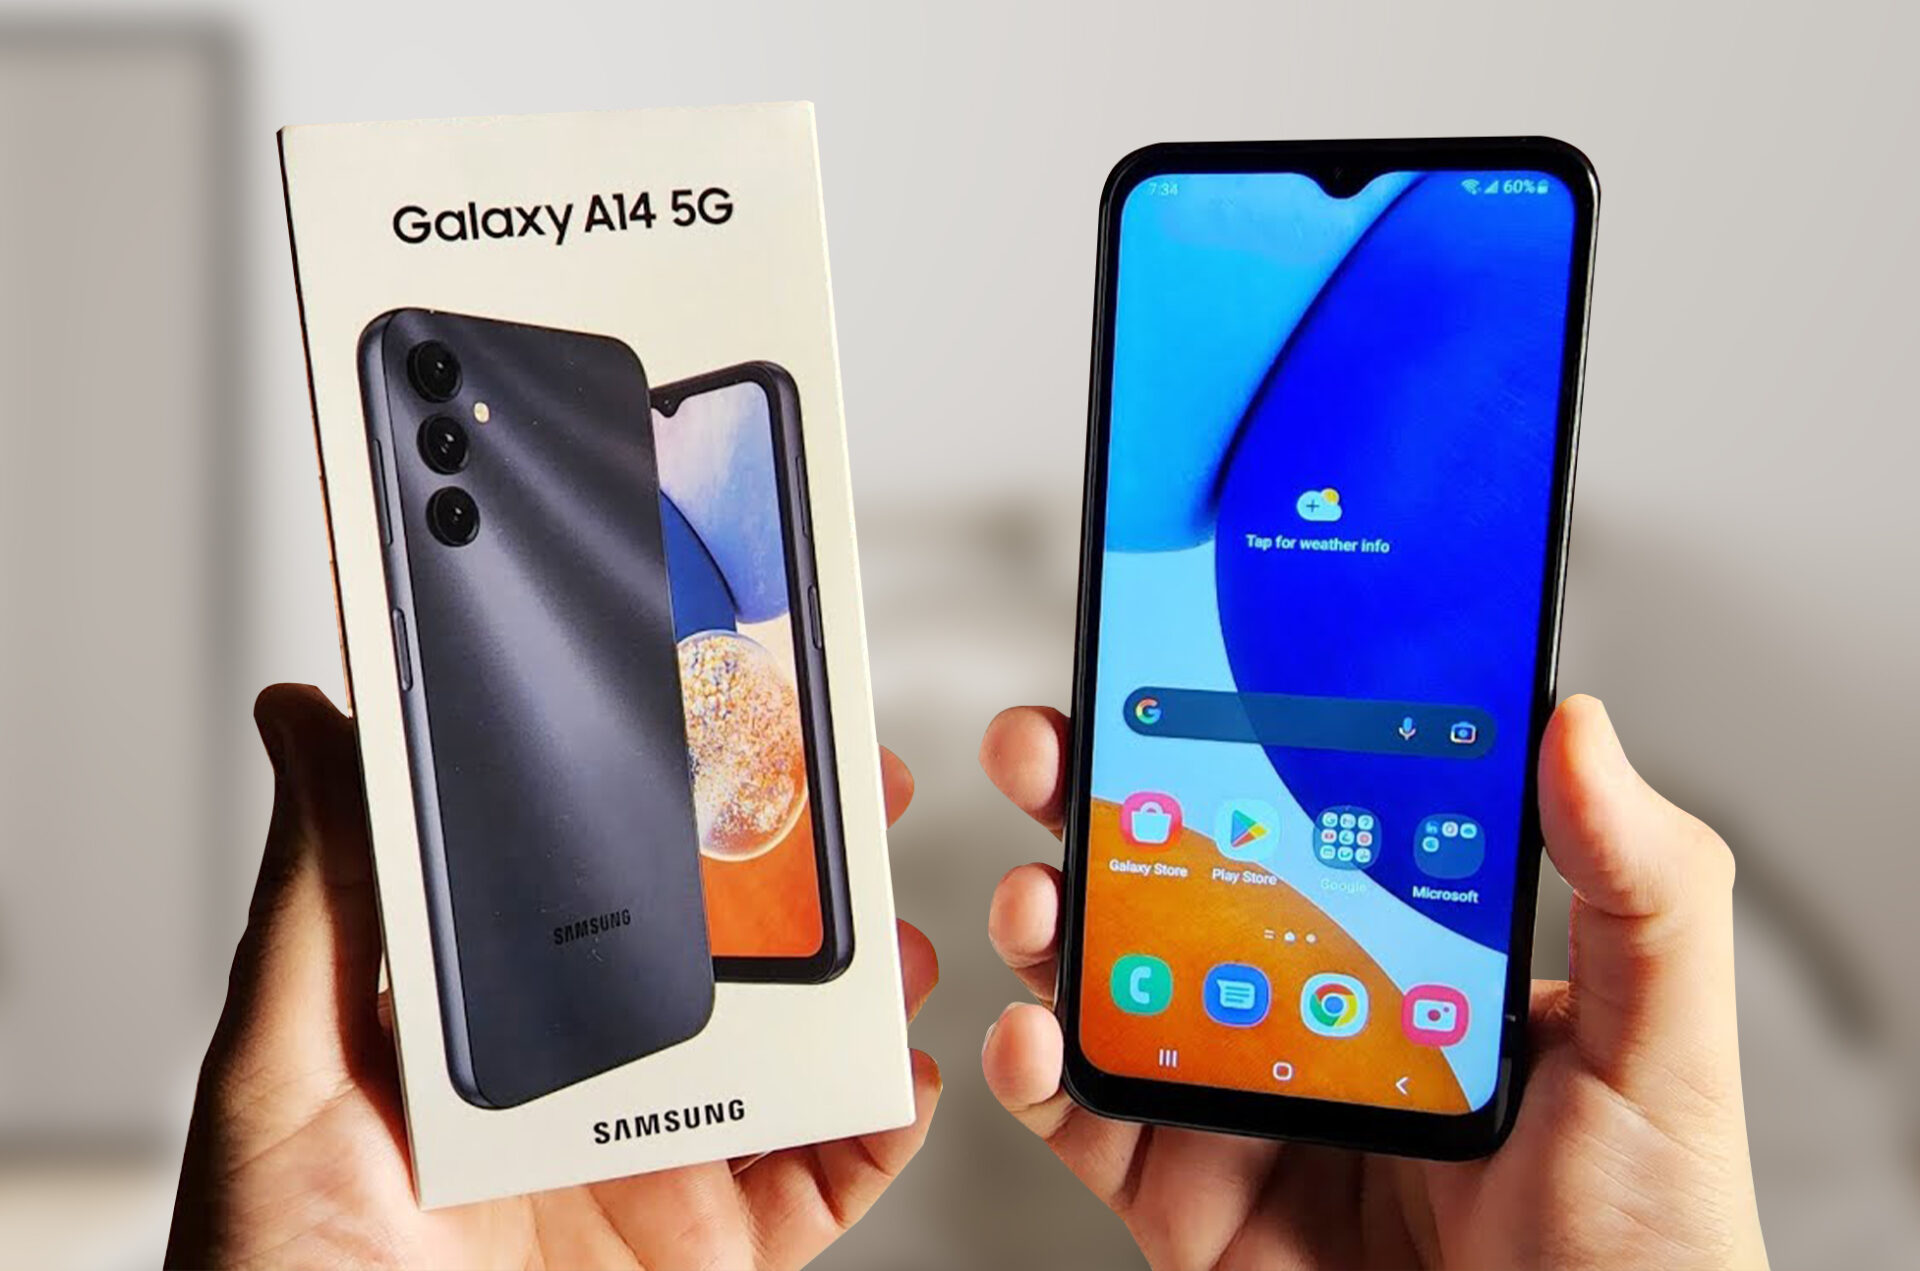 Samsung Galaxy A14 5G (5000 mAh Battery, 64 GB Storage) Price and features